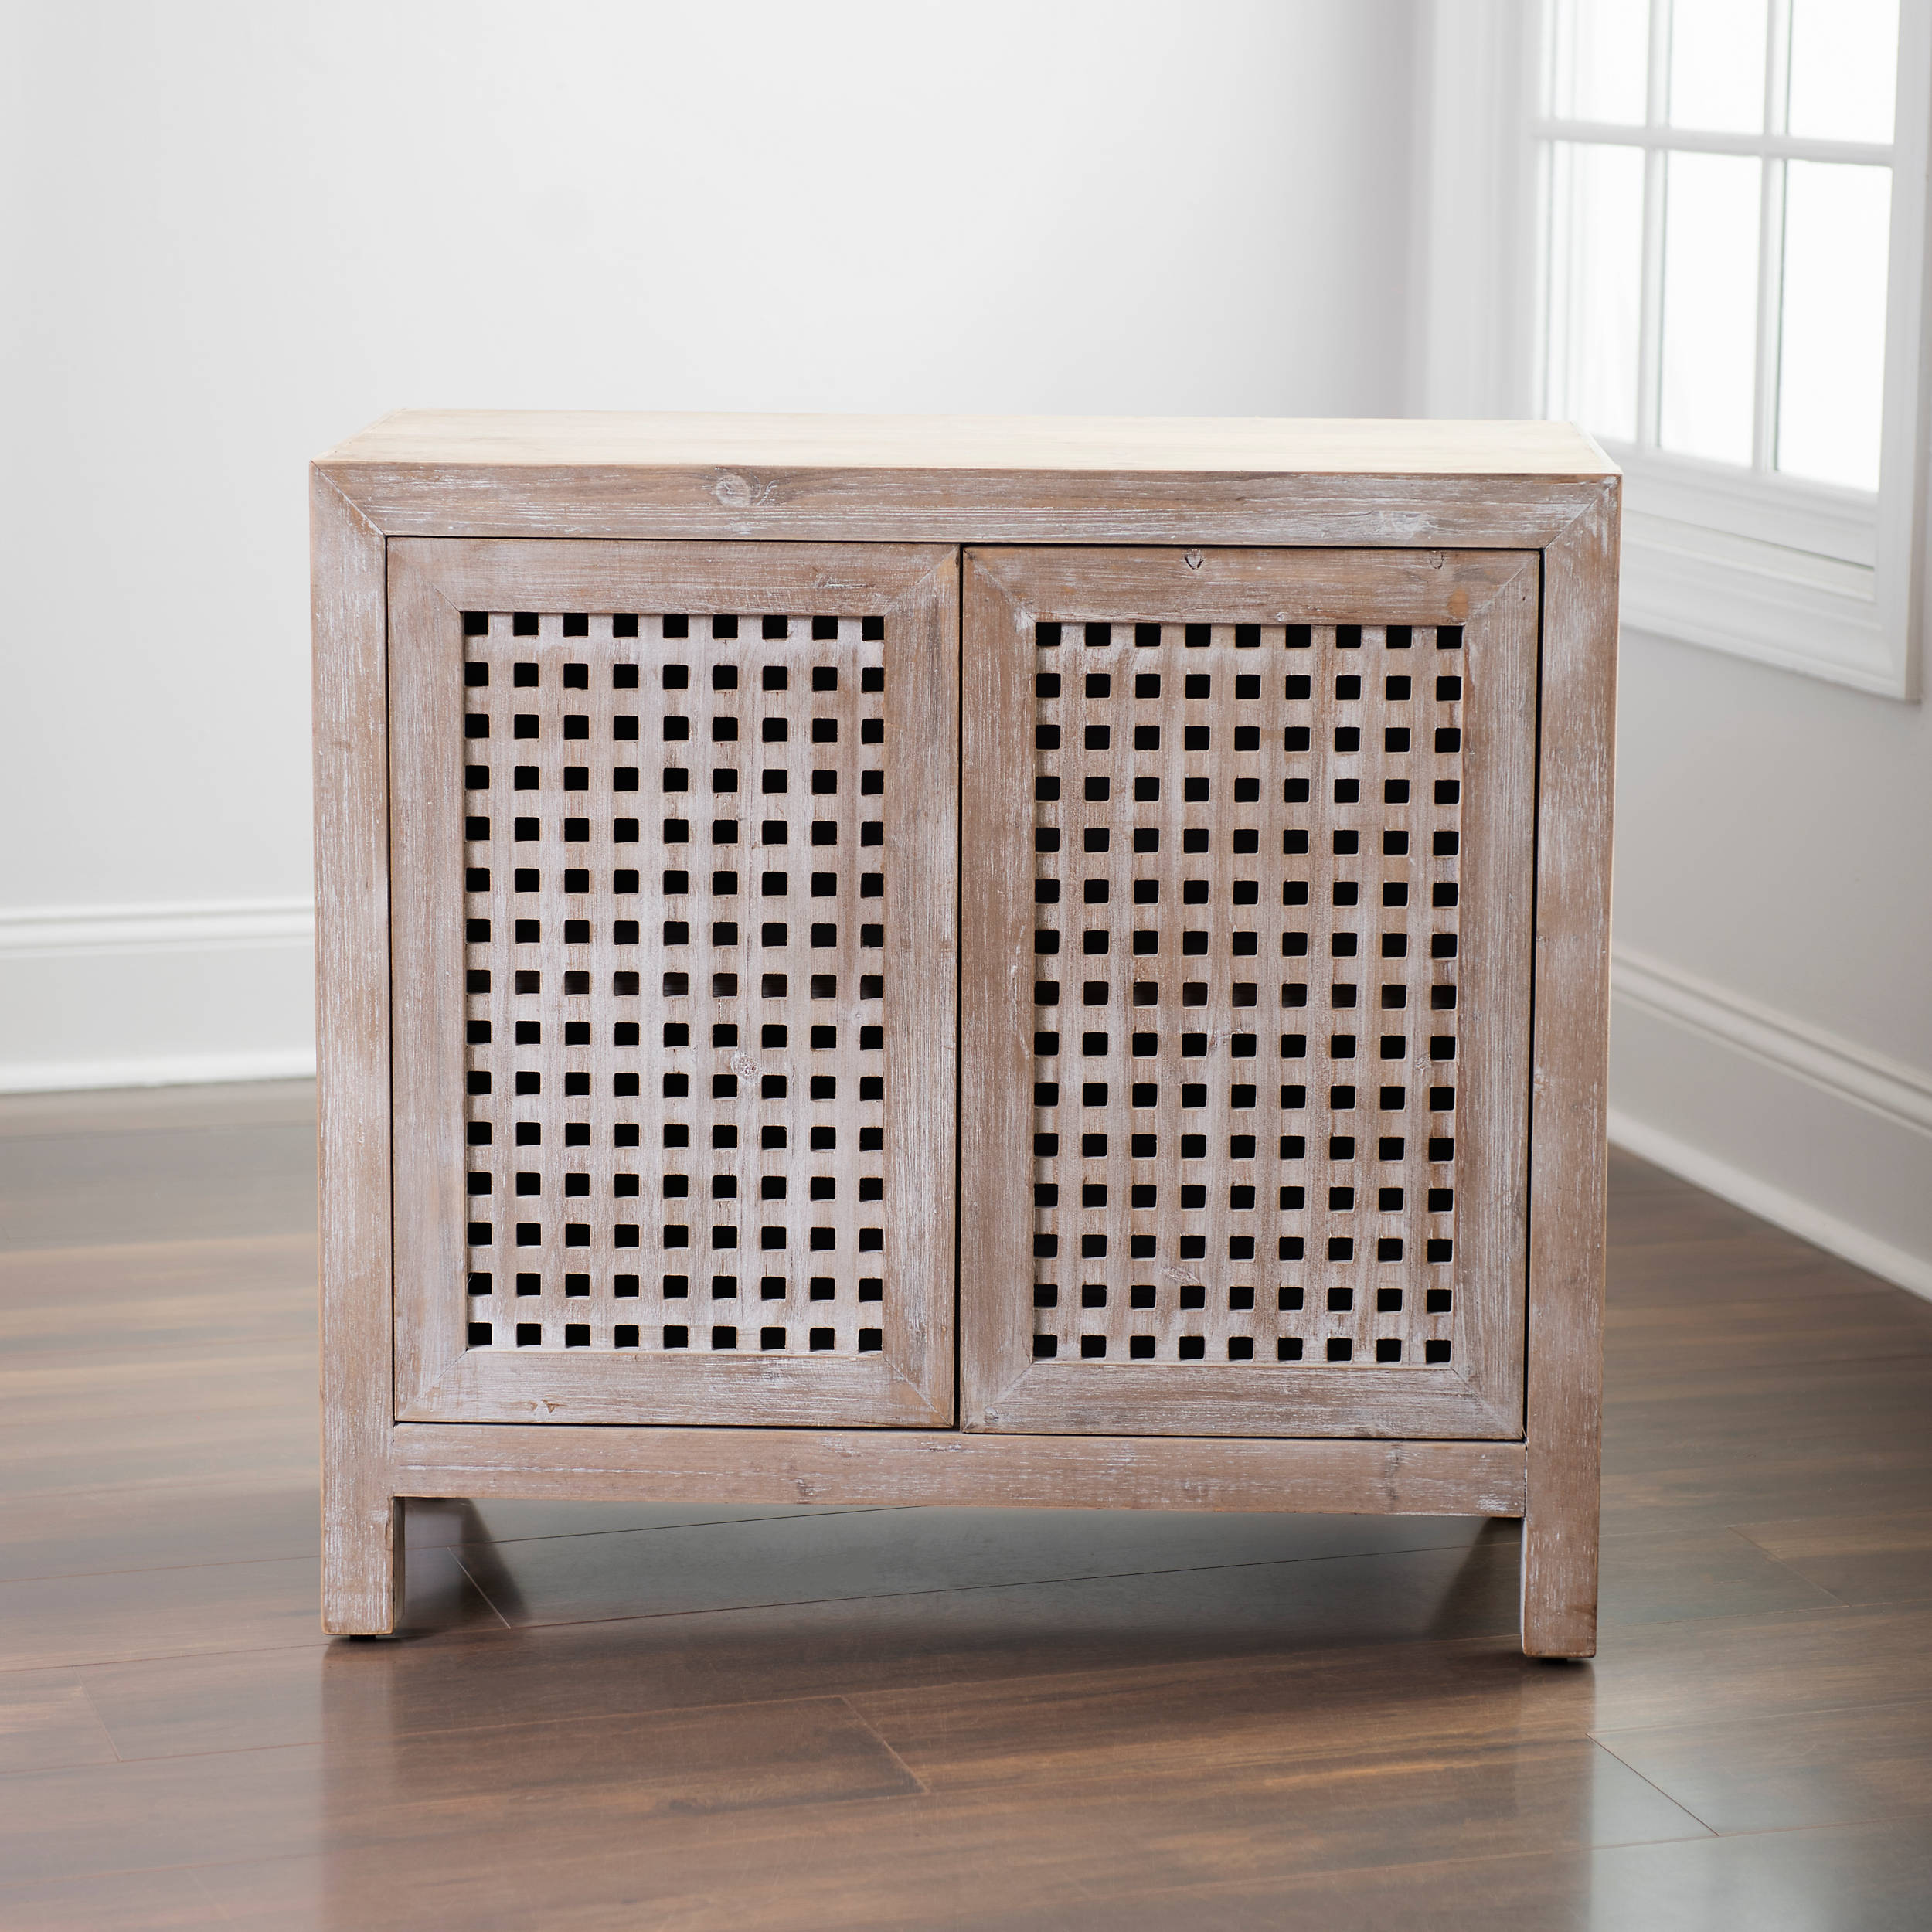 Shop Gray Wash Wooden Grid Cabinet from Kirkland's on Openhaus